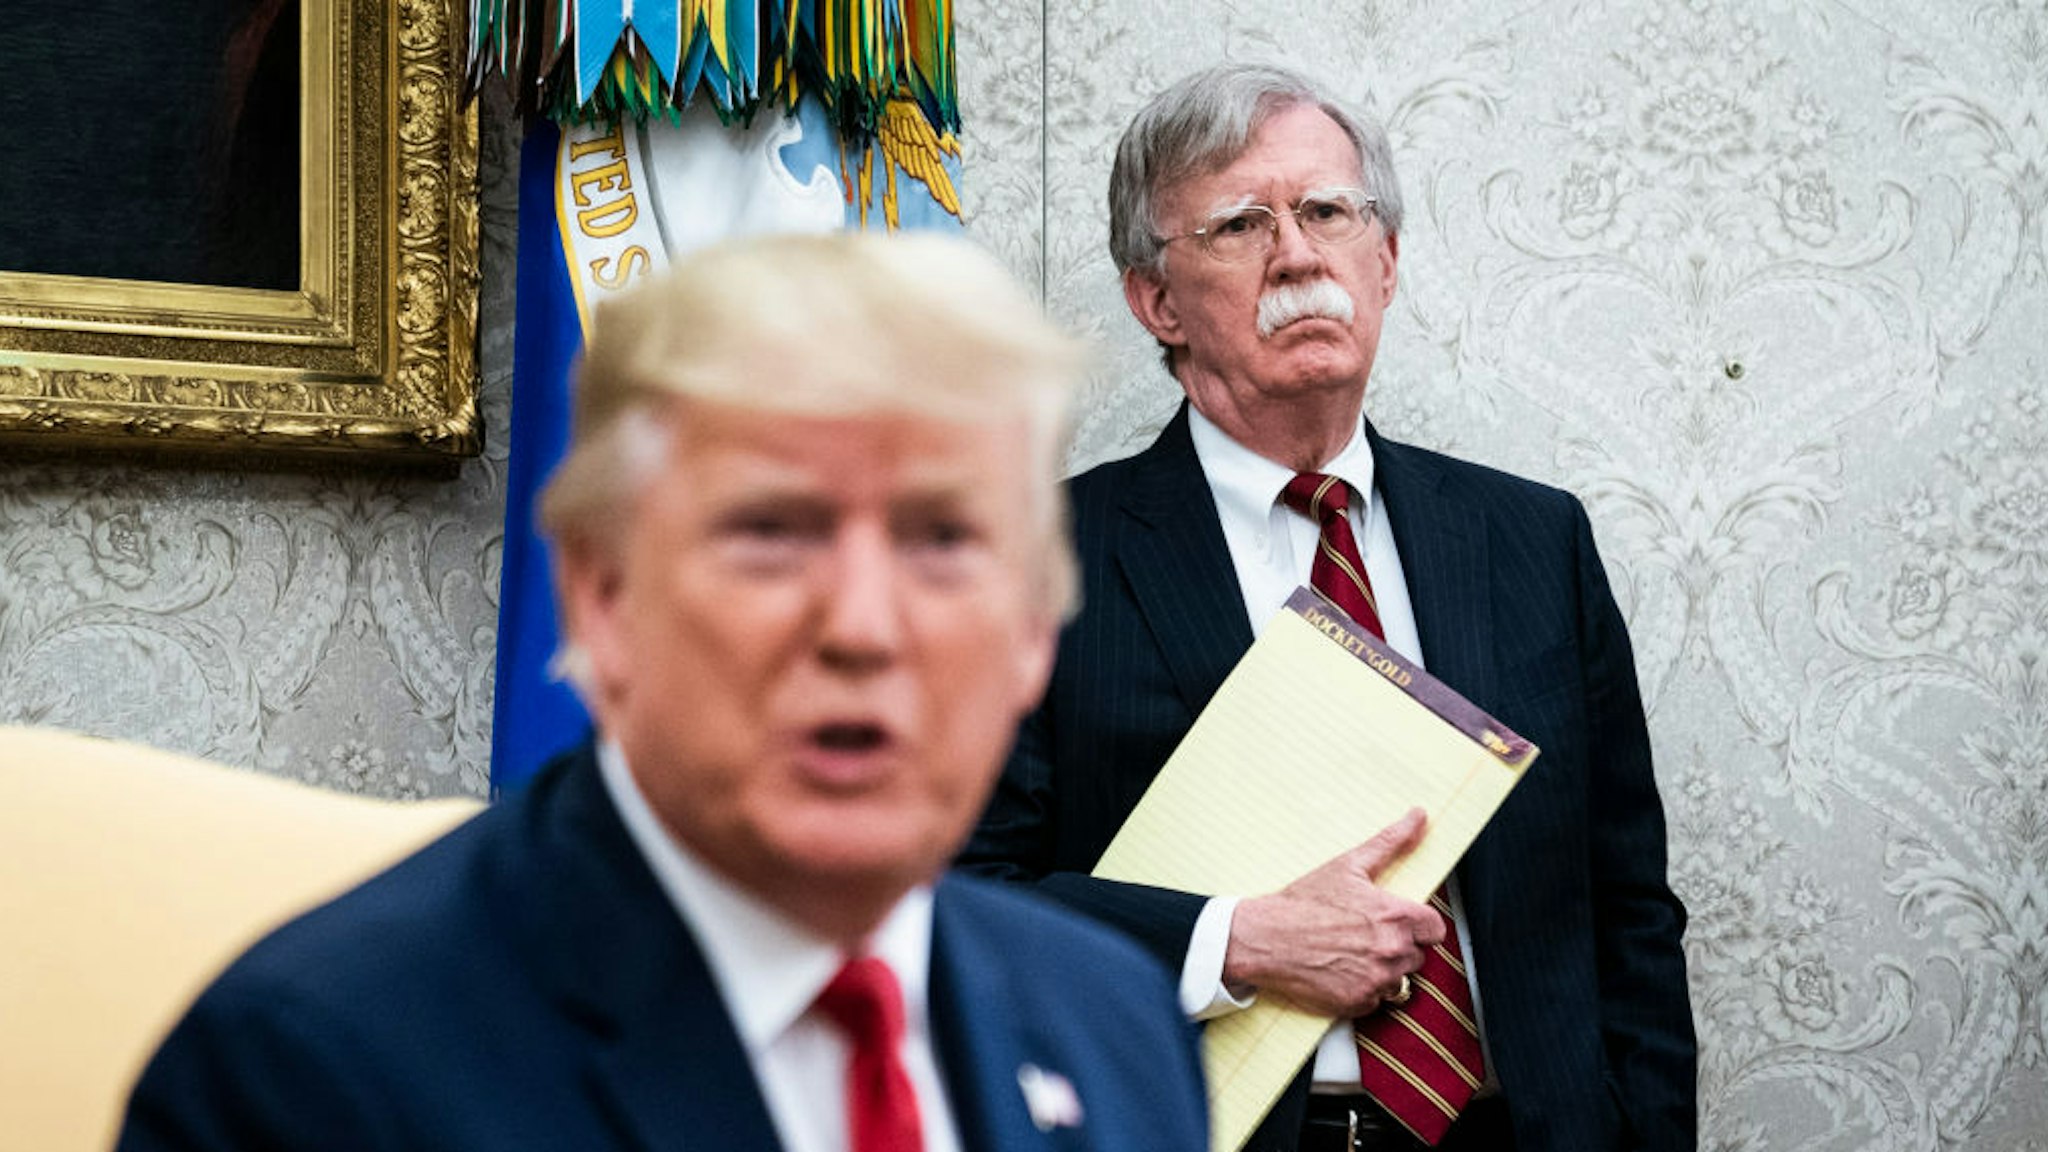 National Security Advisor John R. Bolton listens as President Donald J. Trump meets with Prime Minister of the Netherlands Mark Rutte in the Oval Office at the White House on Thursday, July 18th, 2019 in Washington, DC. (Photo by Jabin Botsford/The Washington Post via Getty Images)